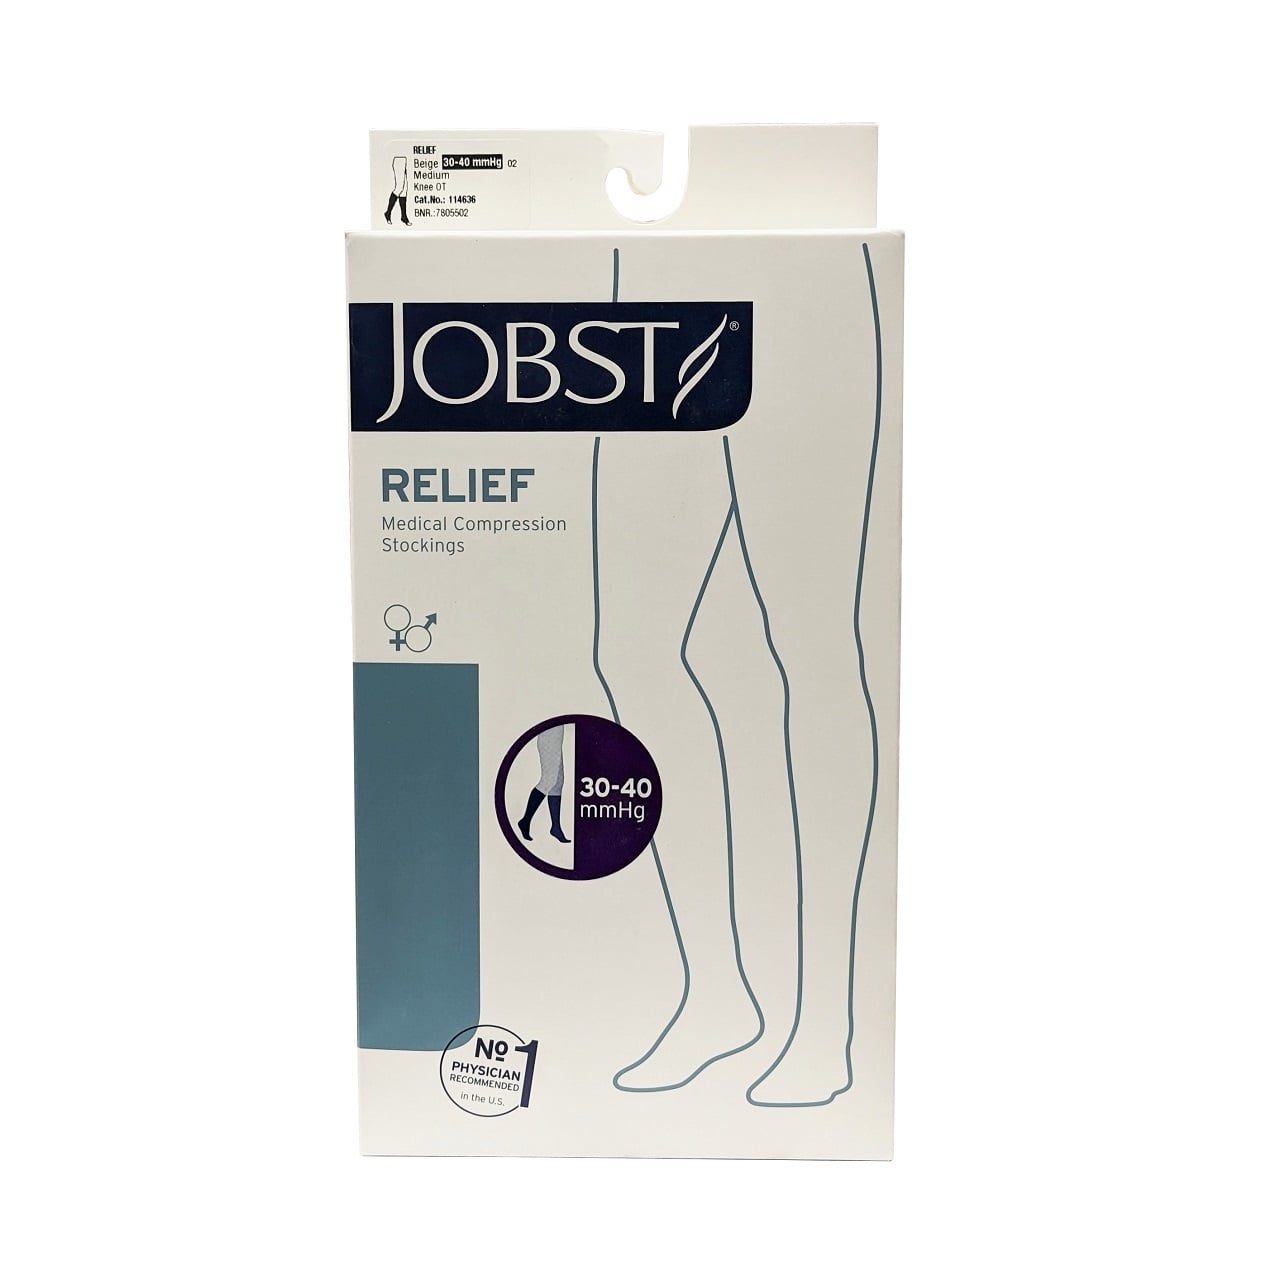 Compression Stockings Women Men 30-40mmHg Thigh High Relief